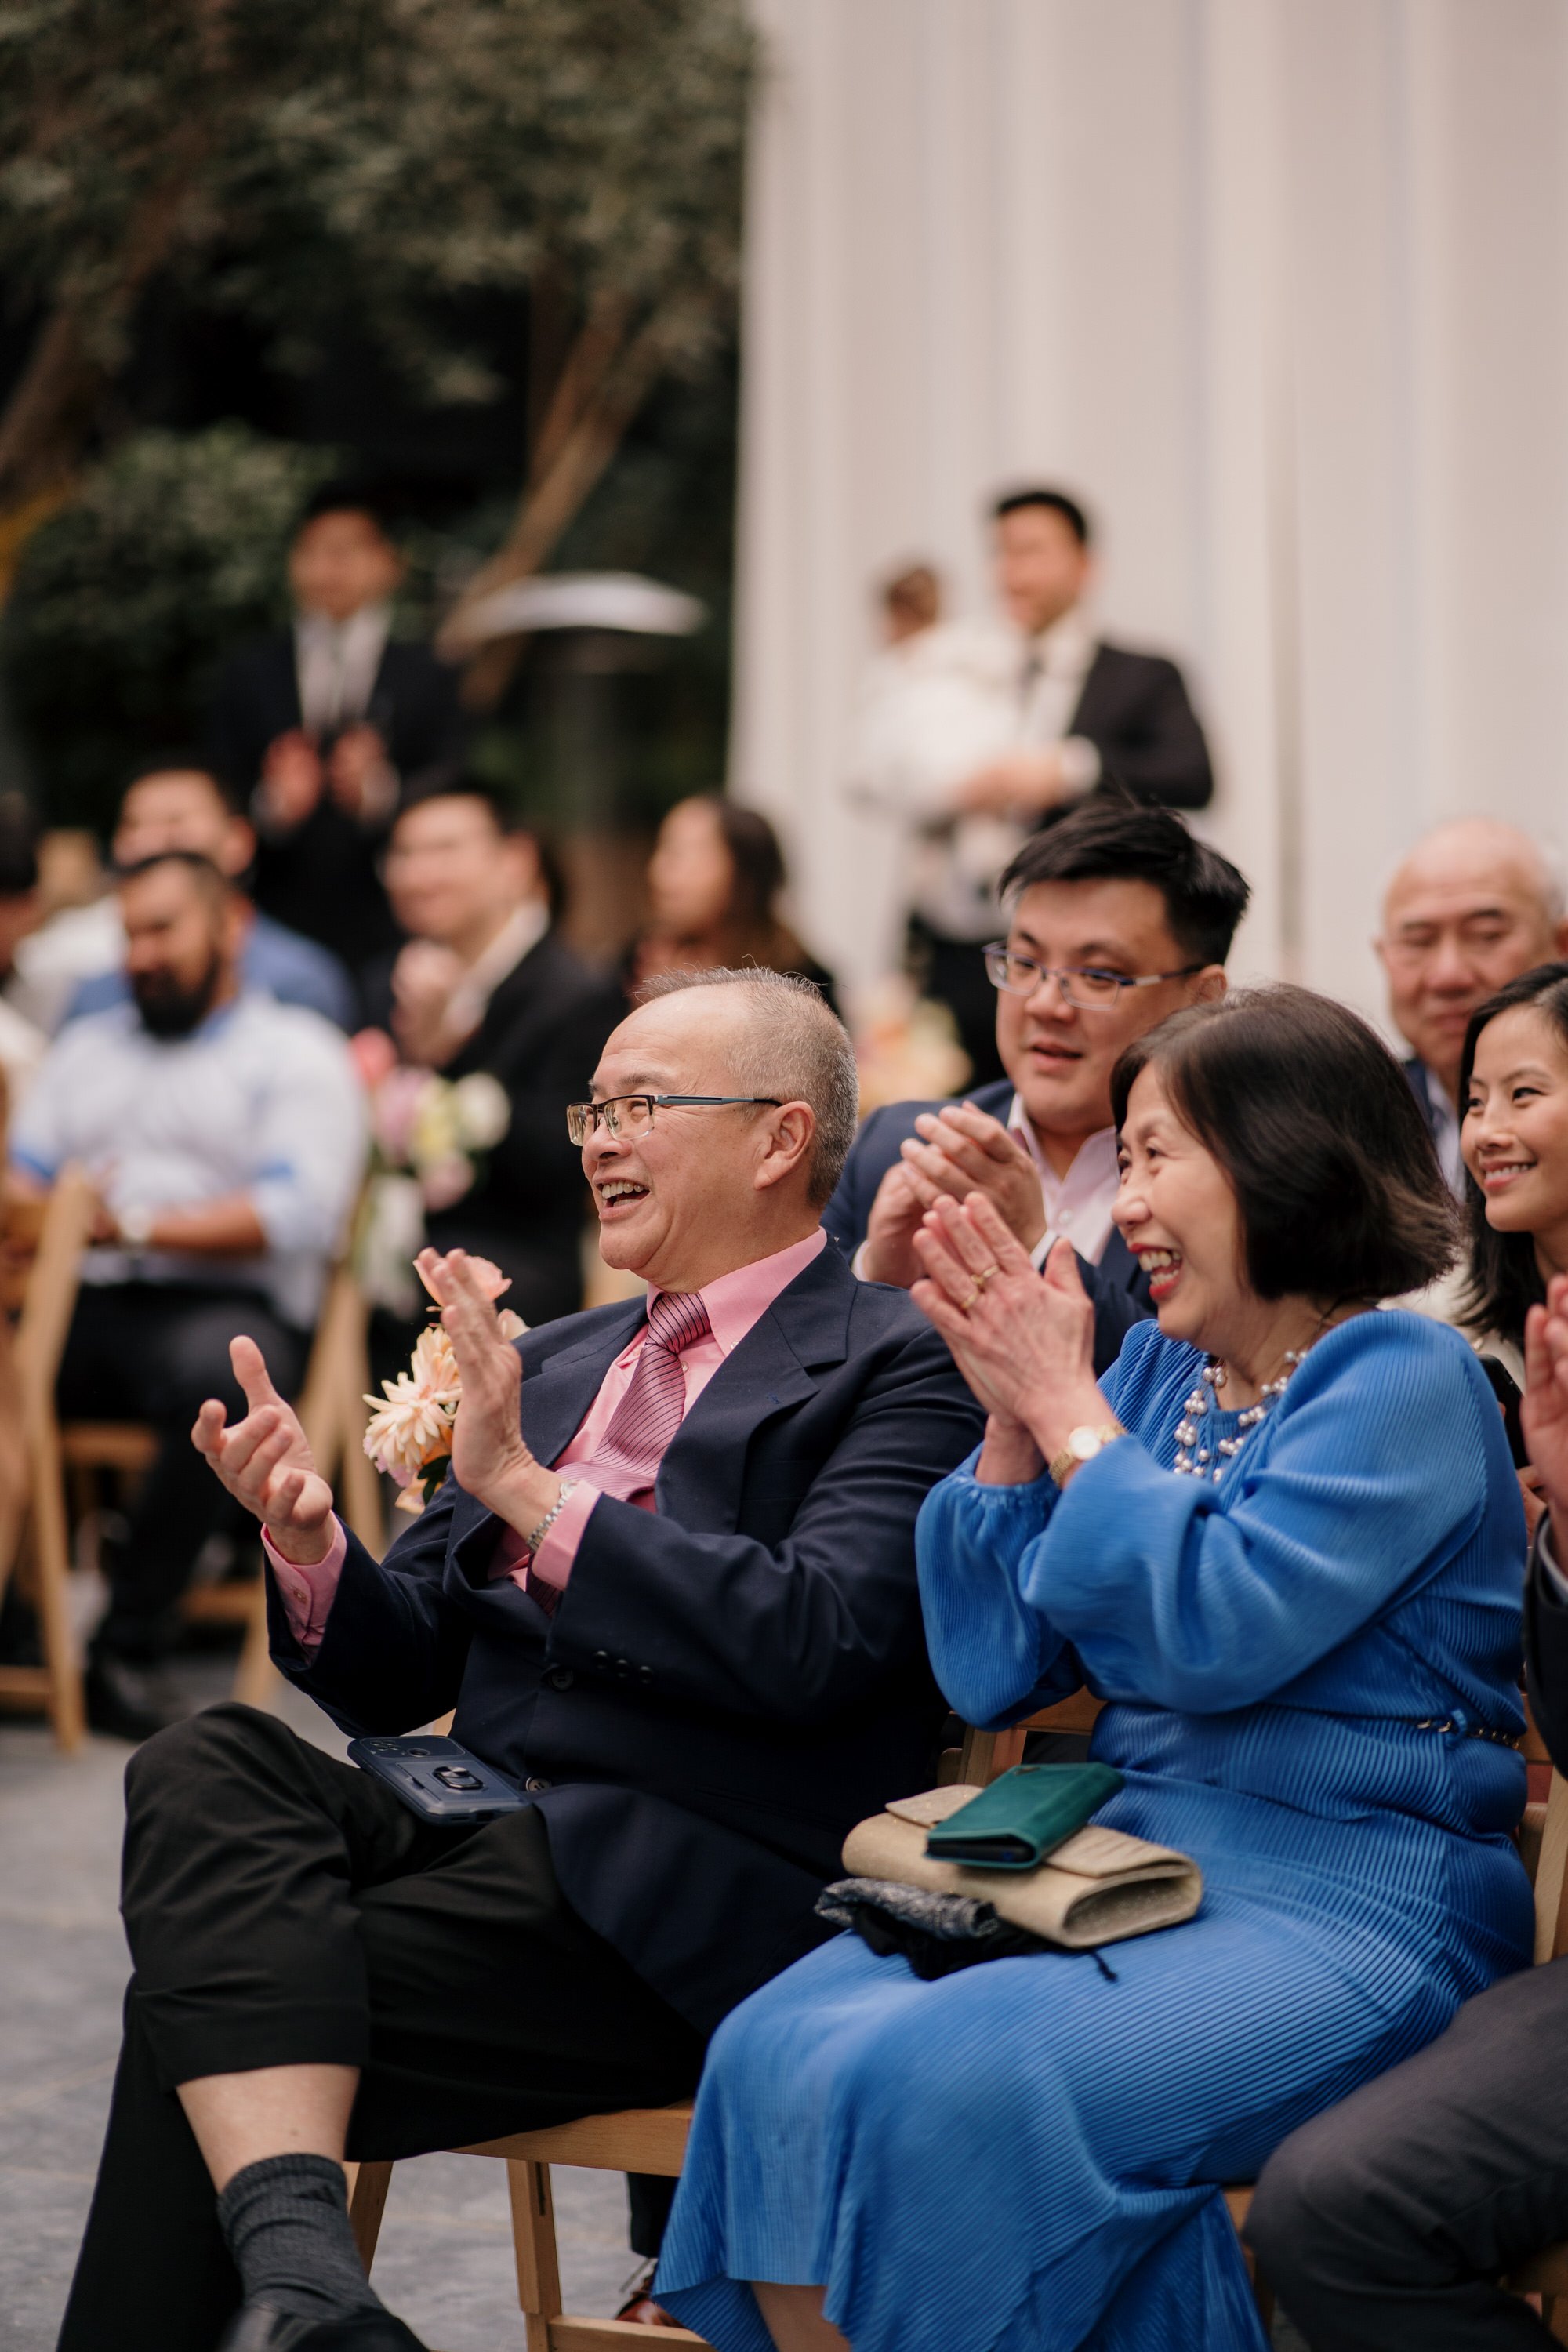 glasshouse-morningside-top-auckland-wedding-phtographer-2023-photography-videography-film-new-zealand-NZ-best-urban-venue-traditional-chinese-ceremony-spring-colourful-pet-dog-dear-white-production (39).jpg